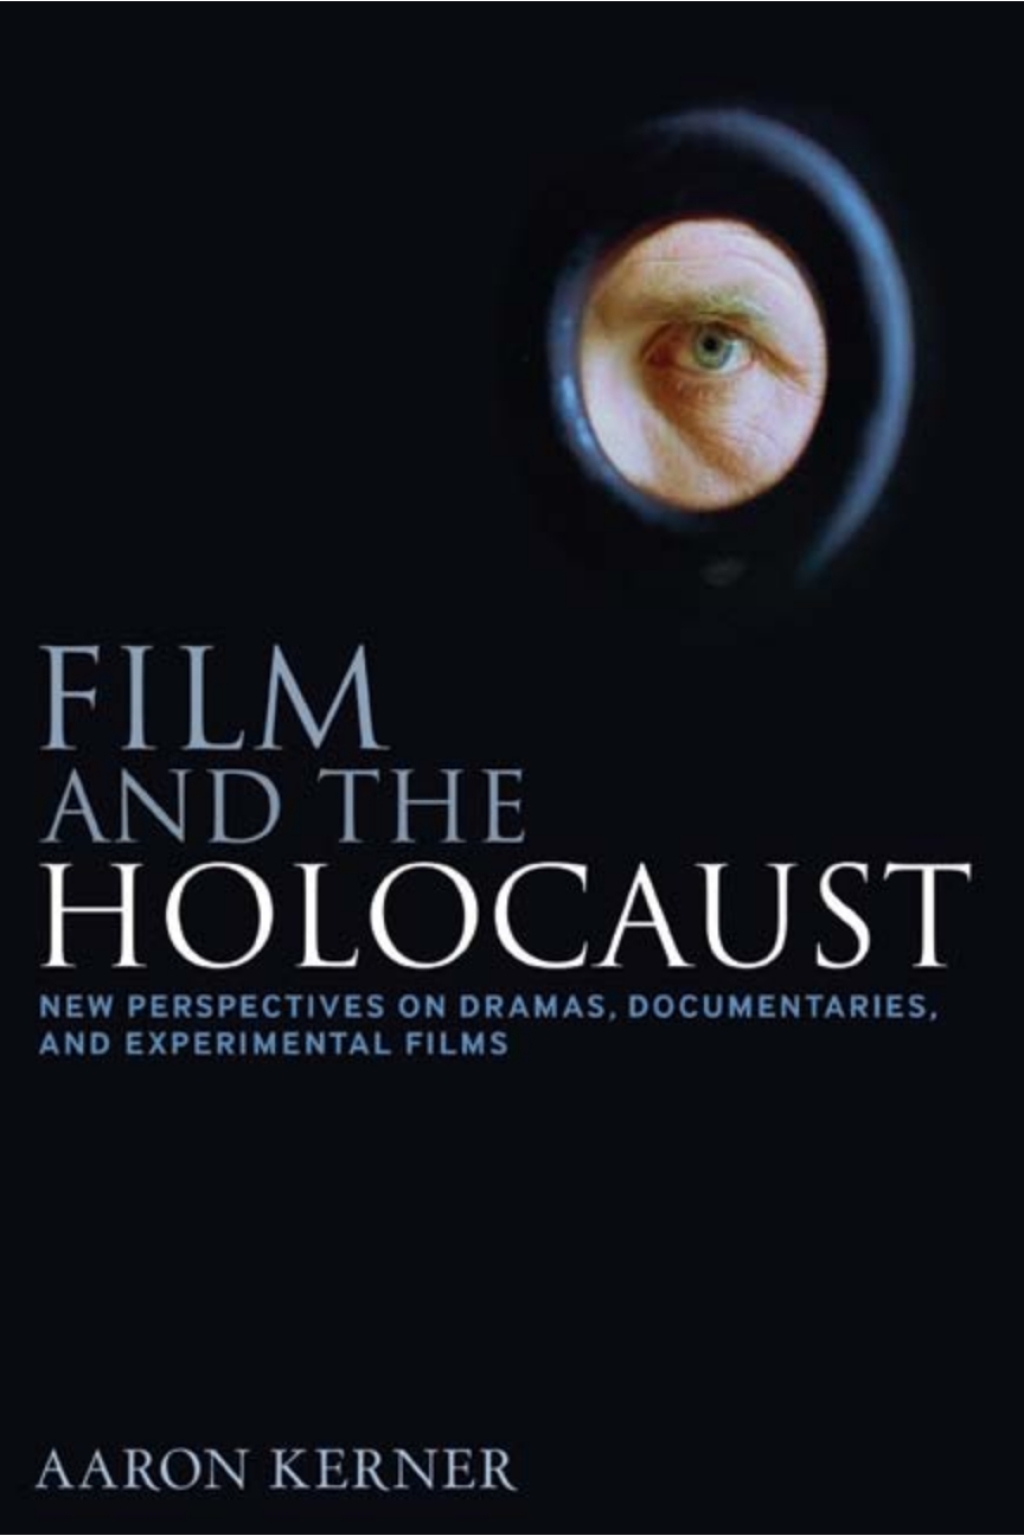 Film and the Holocaust (eBook) - Aaron Kerner